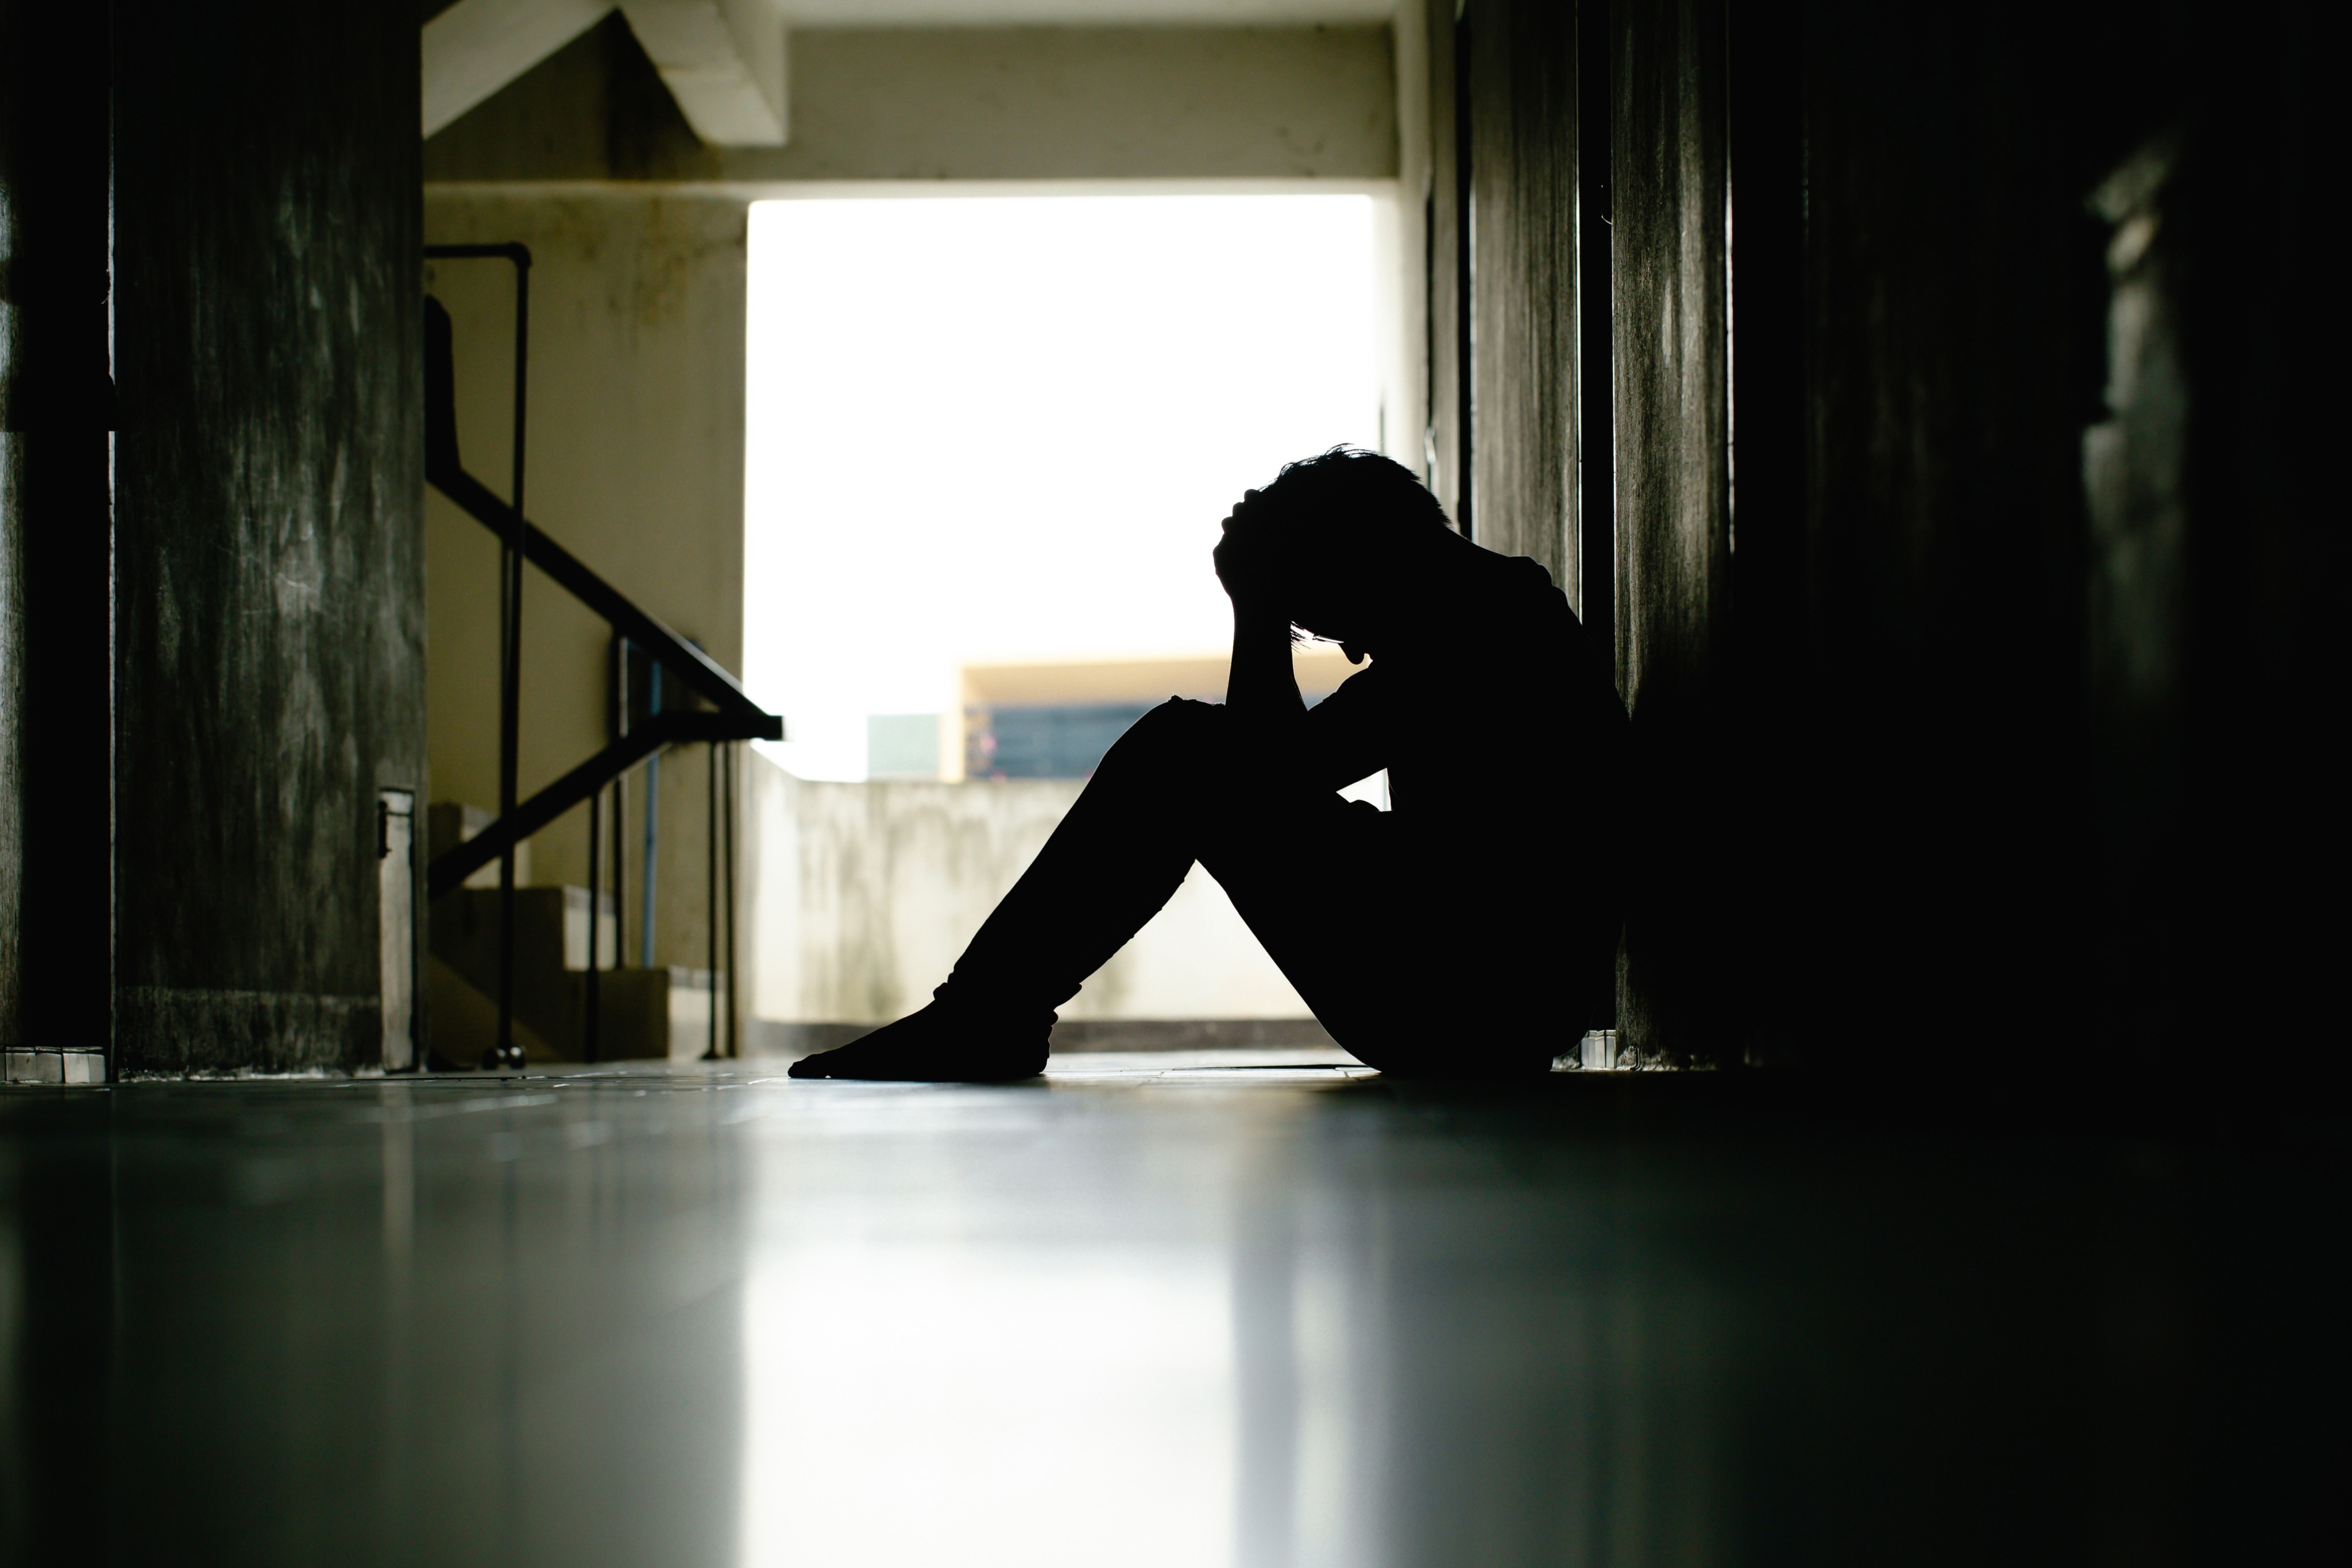 University of Hong Kong scholars have urged schools and parents to take immediate action to help prevent more teenagers from attempting suicide. Photo: Shutterstock